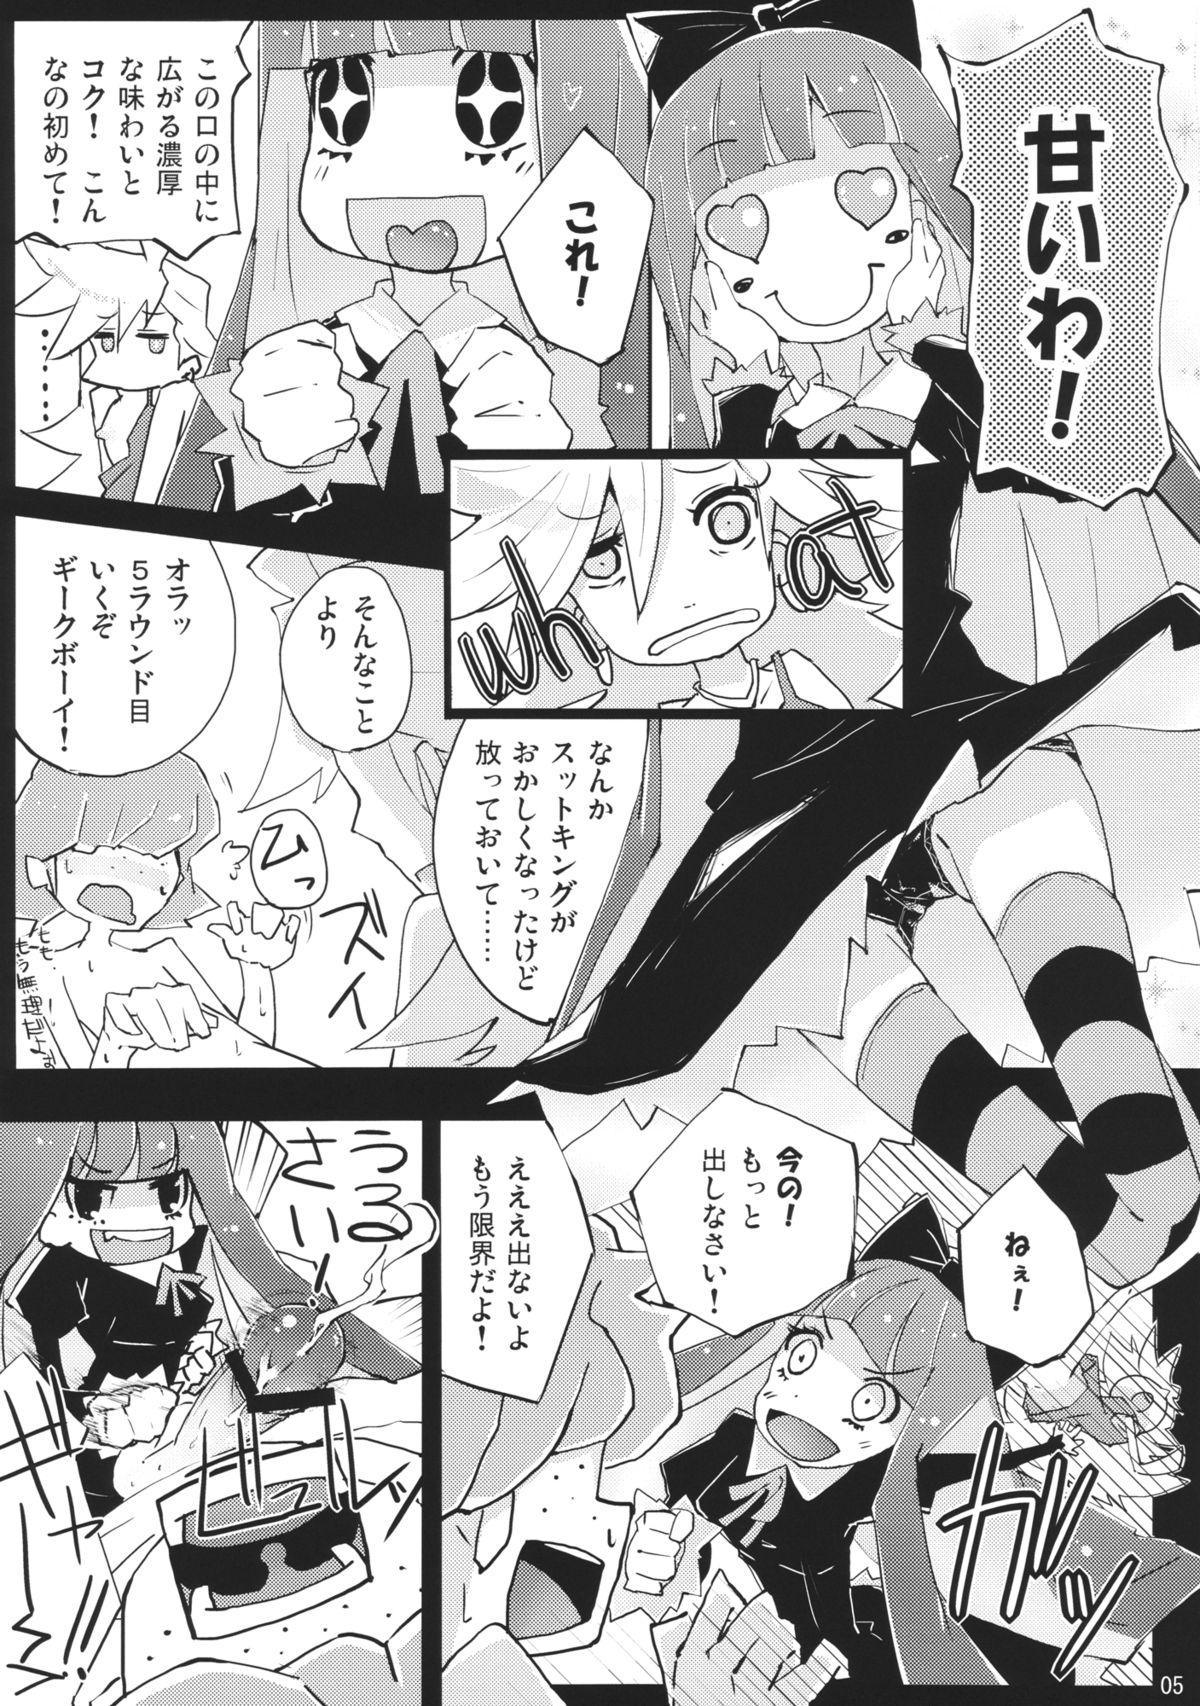 Bigcock Taruta no Leche - Panty and stocking with garterbelt Pounded - Page 5